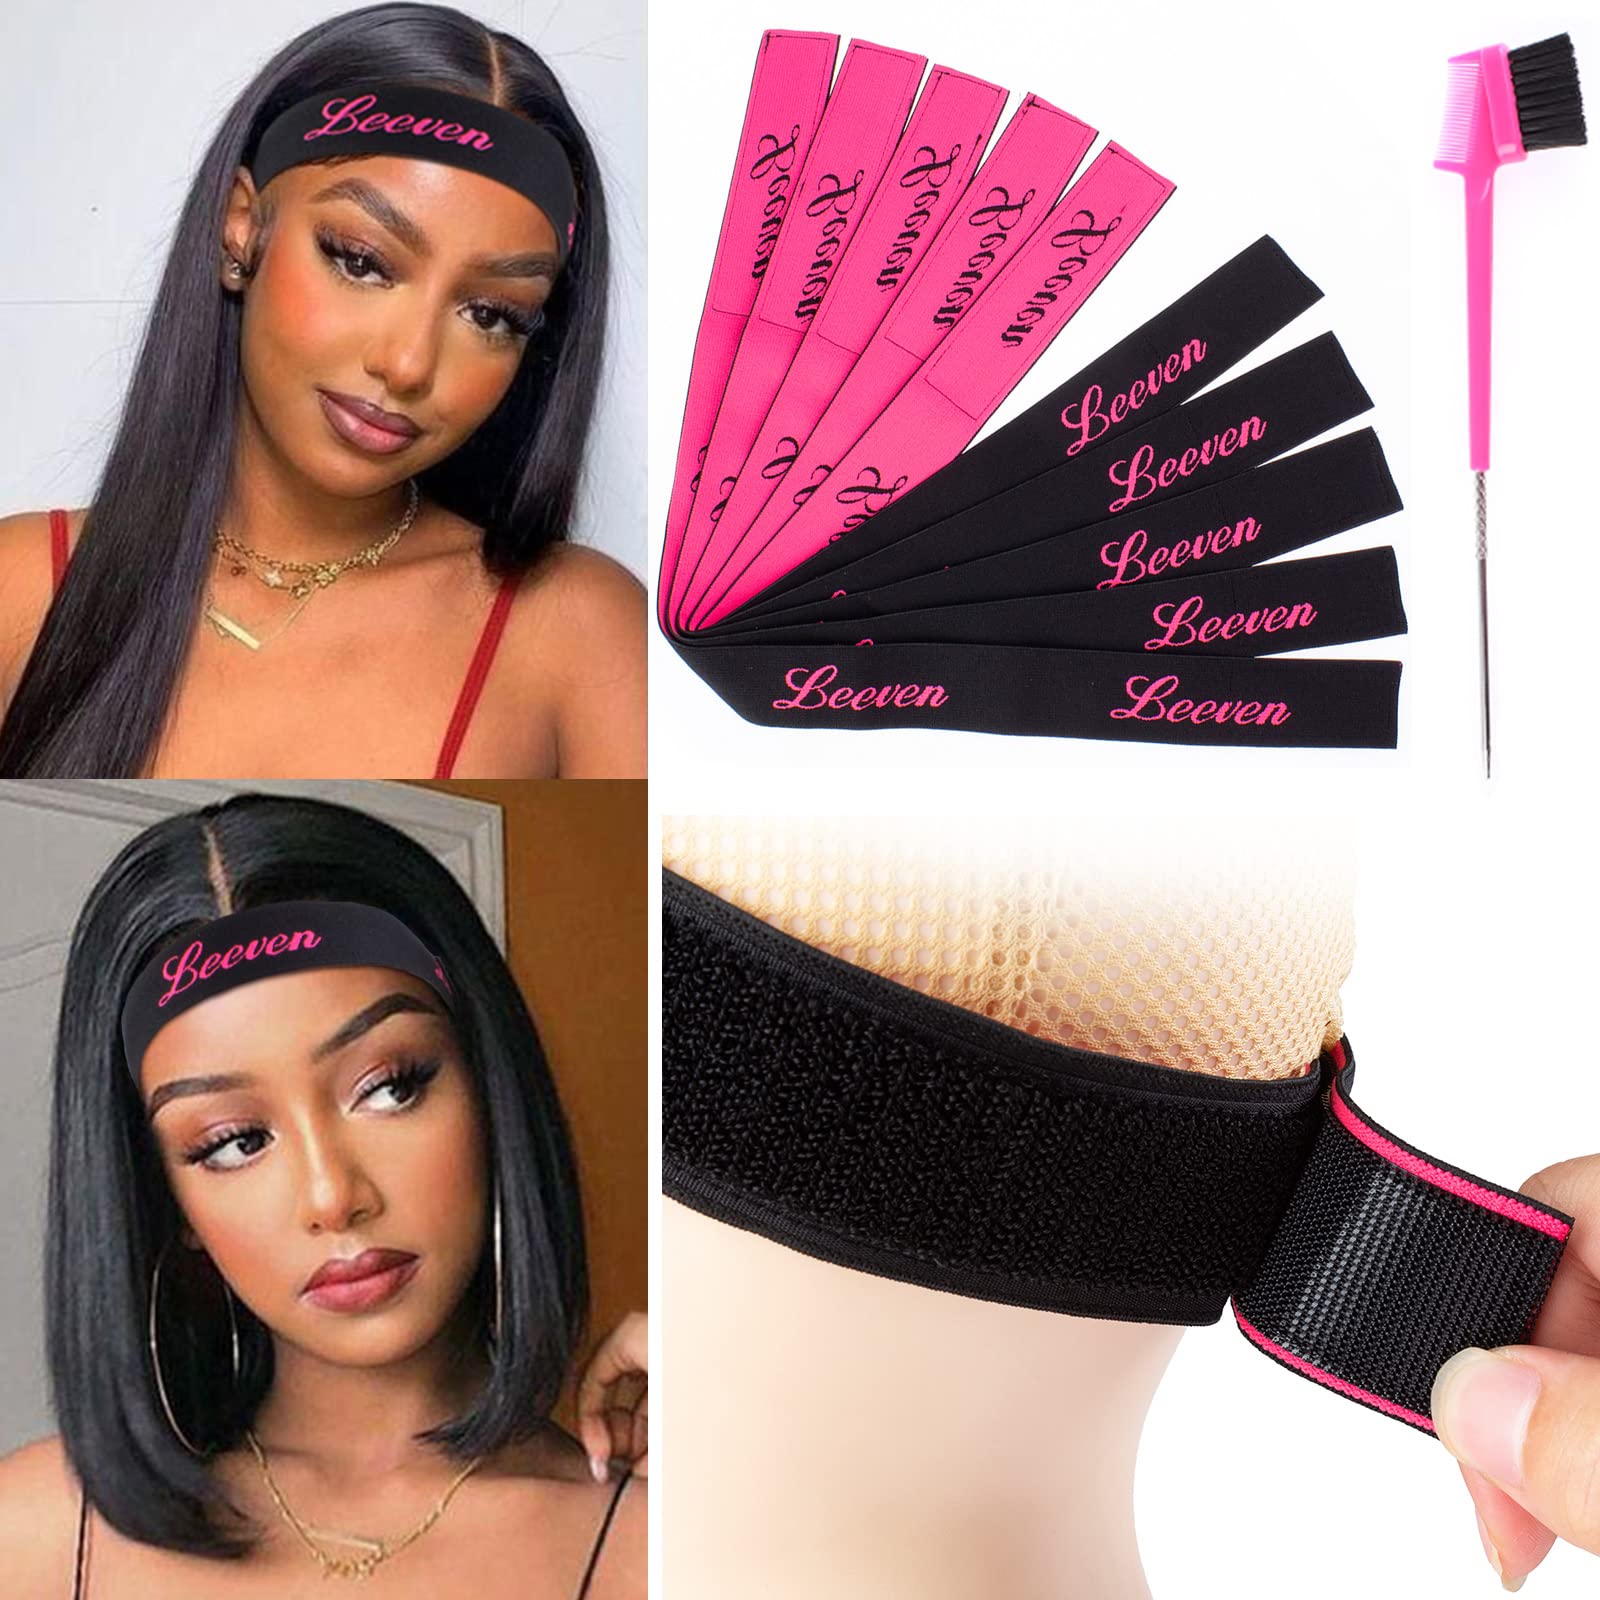 laiyuemei Melt Band for Lace Wigs, 6pcs Edge Band Wig Bands for Keeping Wigs in Place for Melting Lace Melt Band for Lace Wigs/Front (3x60cm)